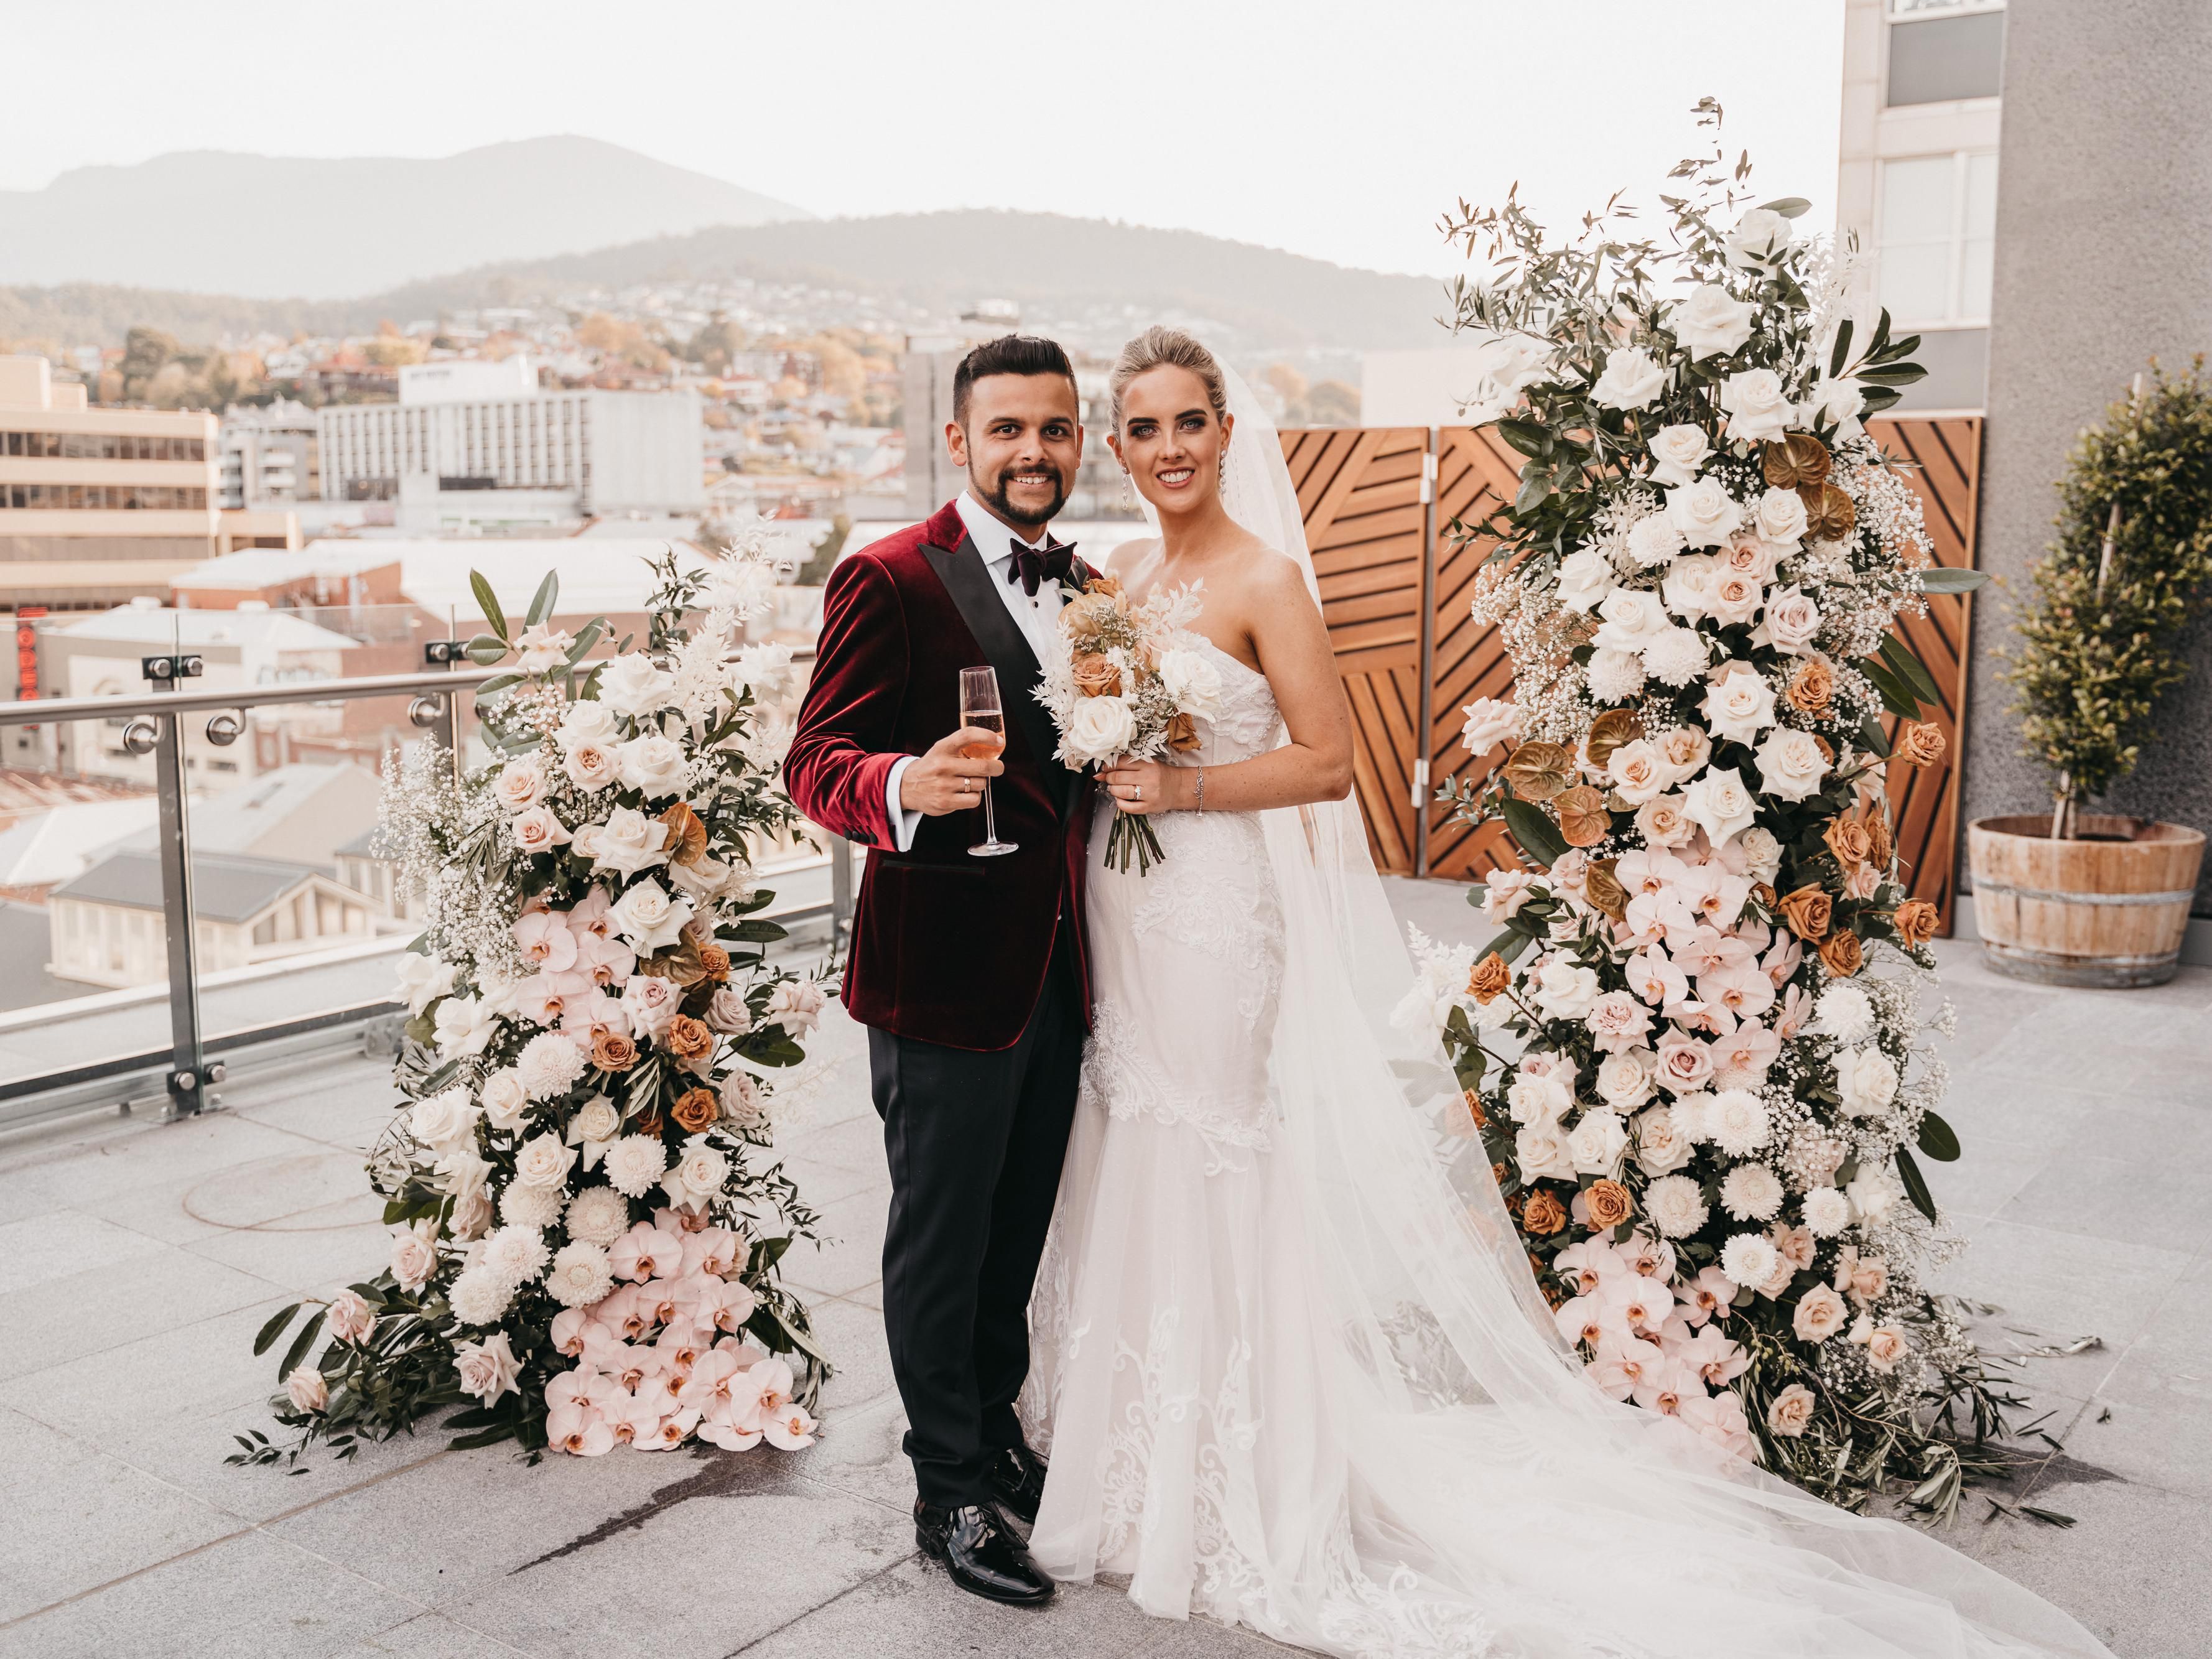 At Crowne Plaza Hobart we understand the meaning of this day and the importance of sharing it with all of your loved ones. So relax and enjoy as we create a unique
and fun experience and tie the knot on our private courtyard with the stunning backdrop of Mt Wellington.
Contact us at crowneplazahobart@ihg.com for more information on packages. ⁠
⁠